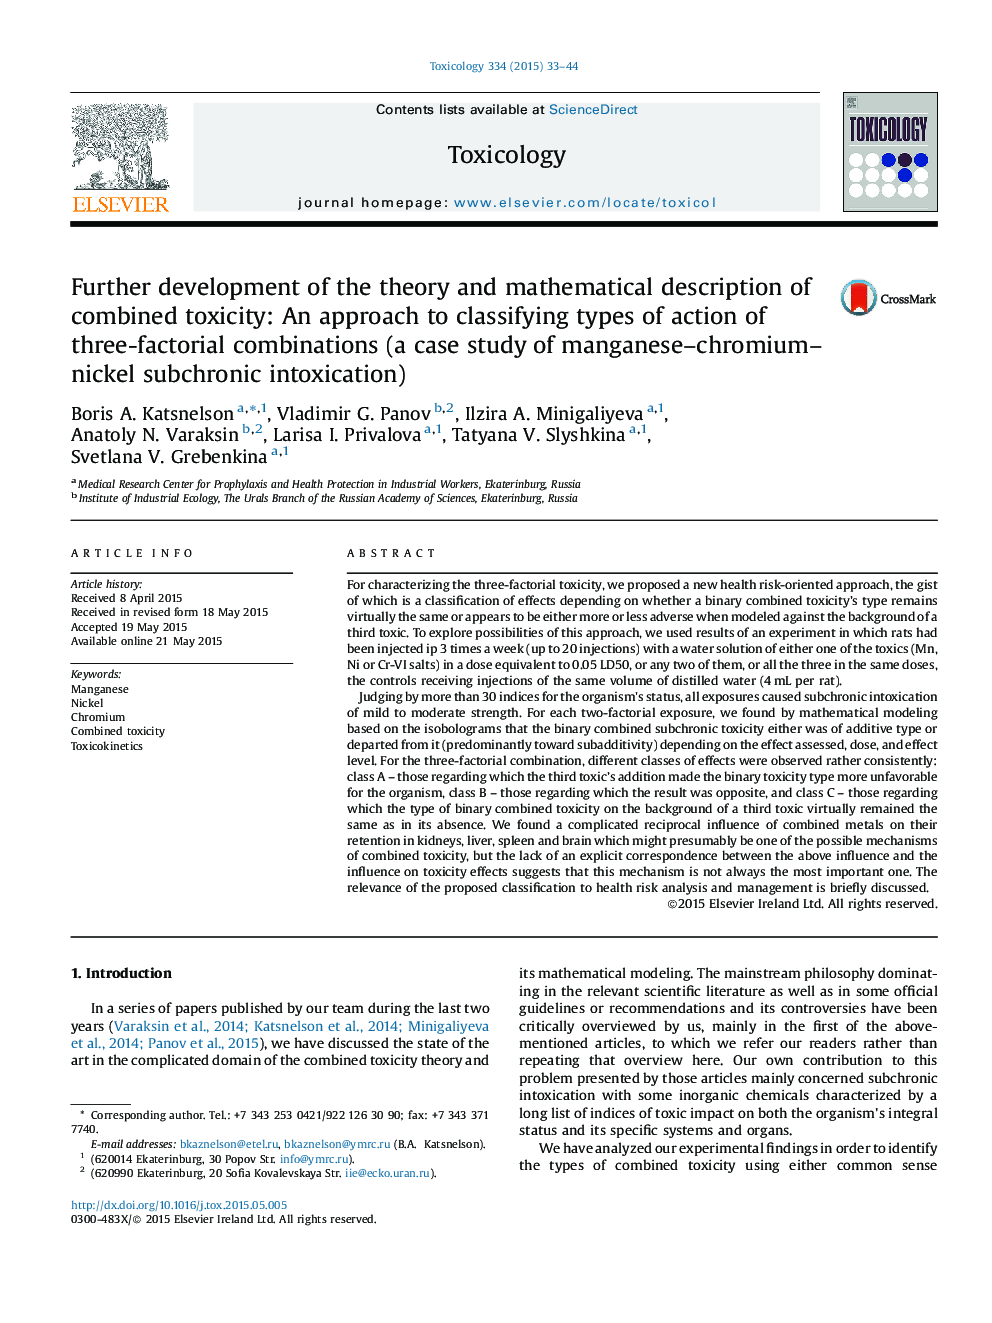 Further development of the theory and mathematical description of combined toxicity: An approach to classifying types of action of three-factorial combinations (a case study of manganese-chromium-nickel subchronic intoxication)